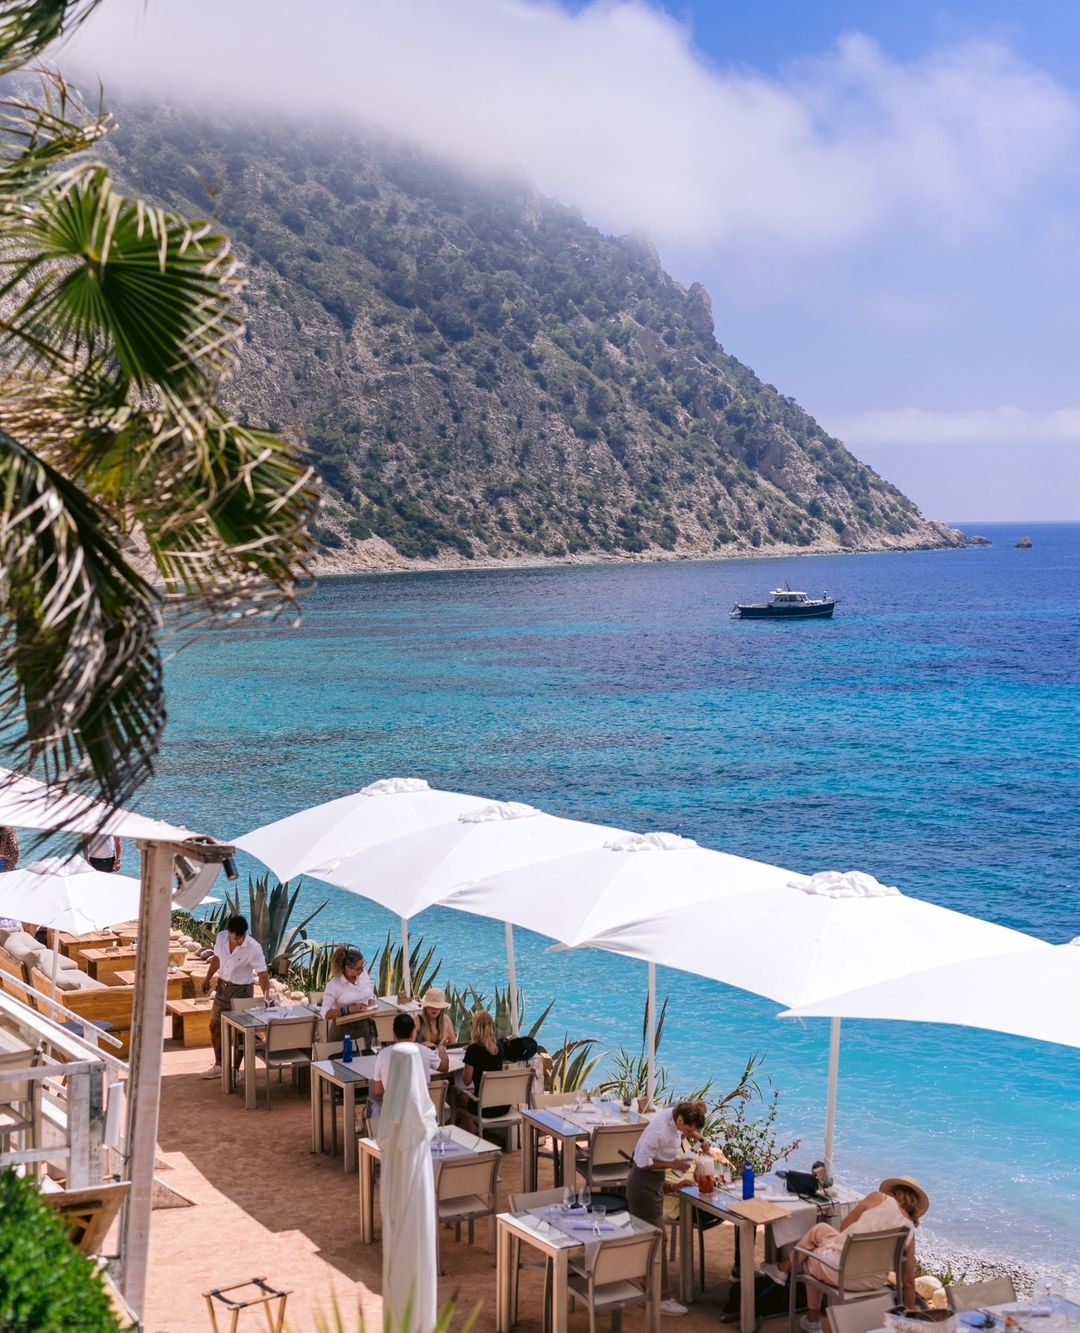 Unforgettable culinary experience right on the beach, with stunning views of the Mediterranean sea at Amante Ibiza